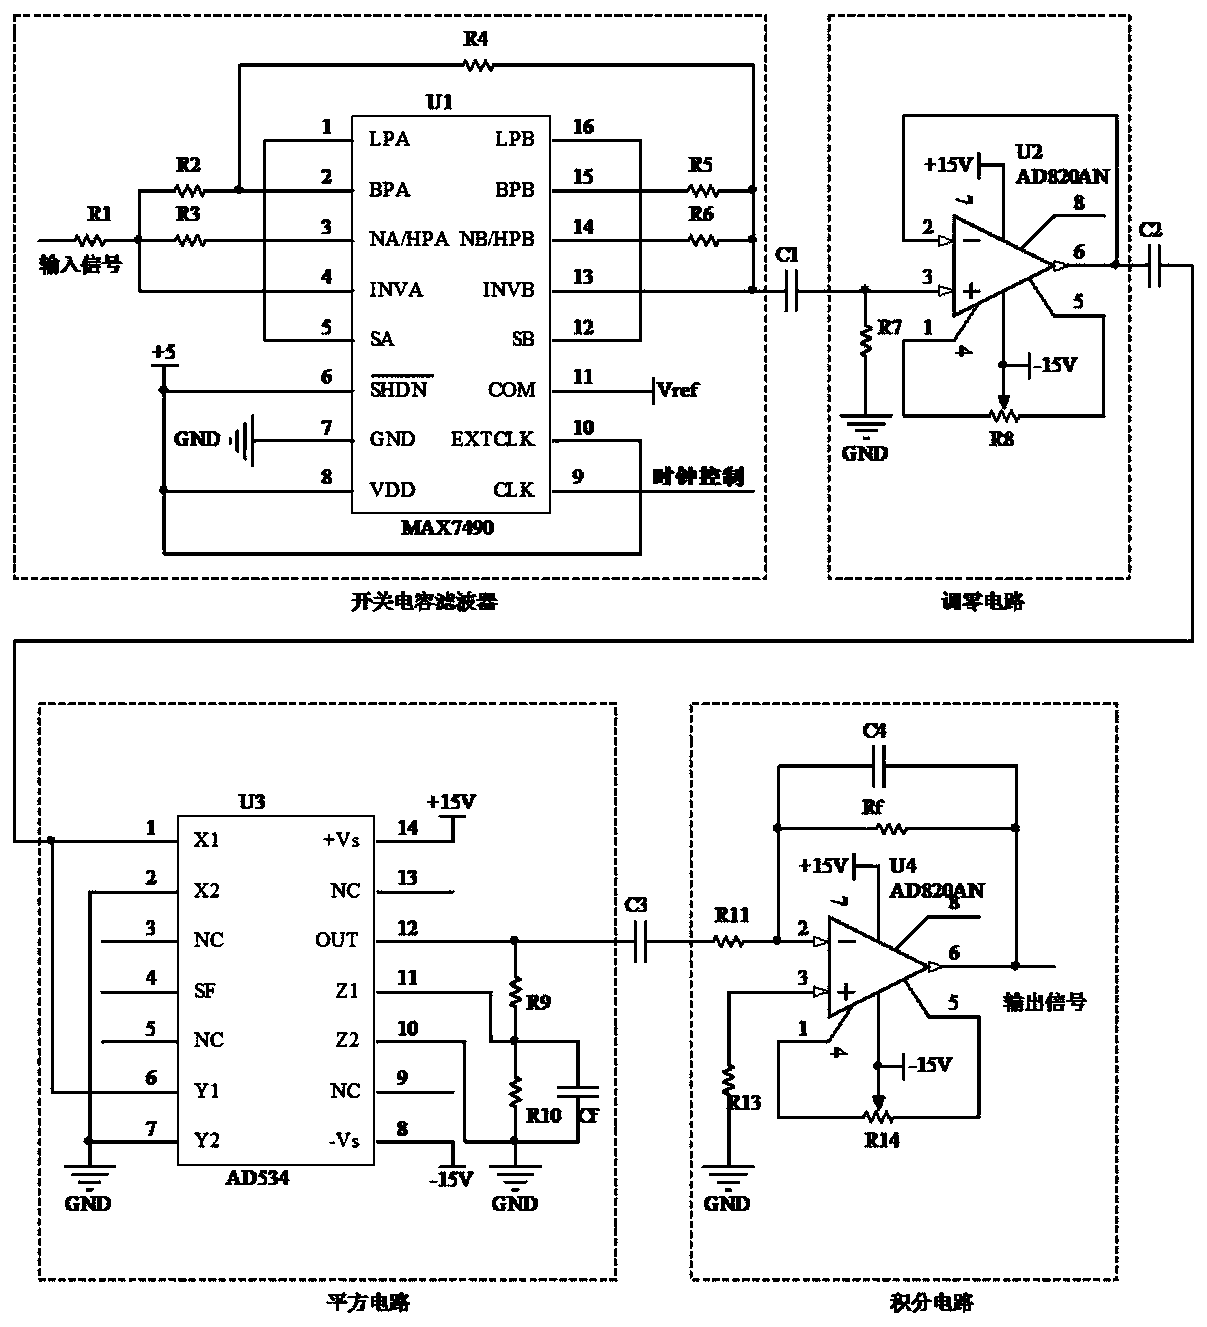 Ship noise power spectrum analysis circuit and method based on controllable filter bank